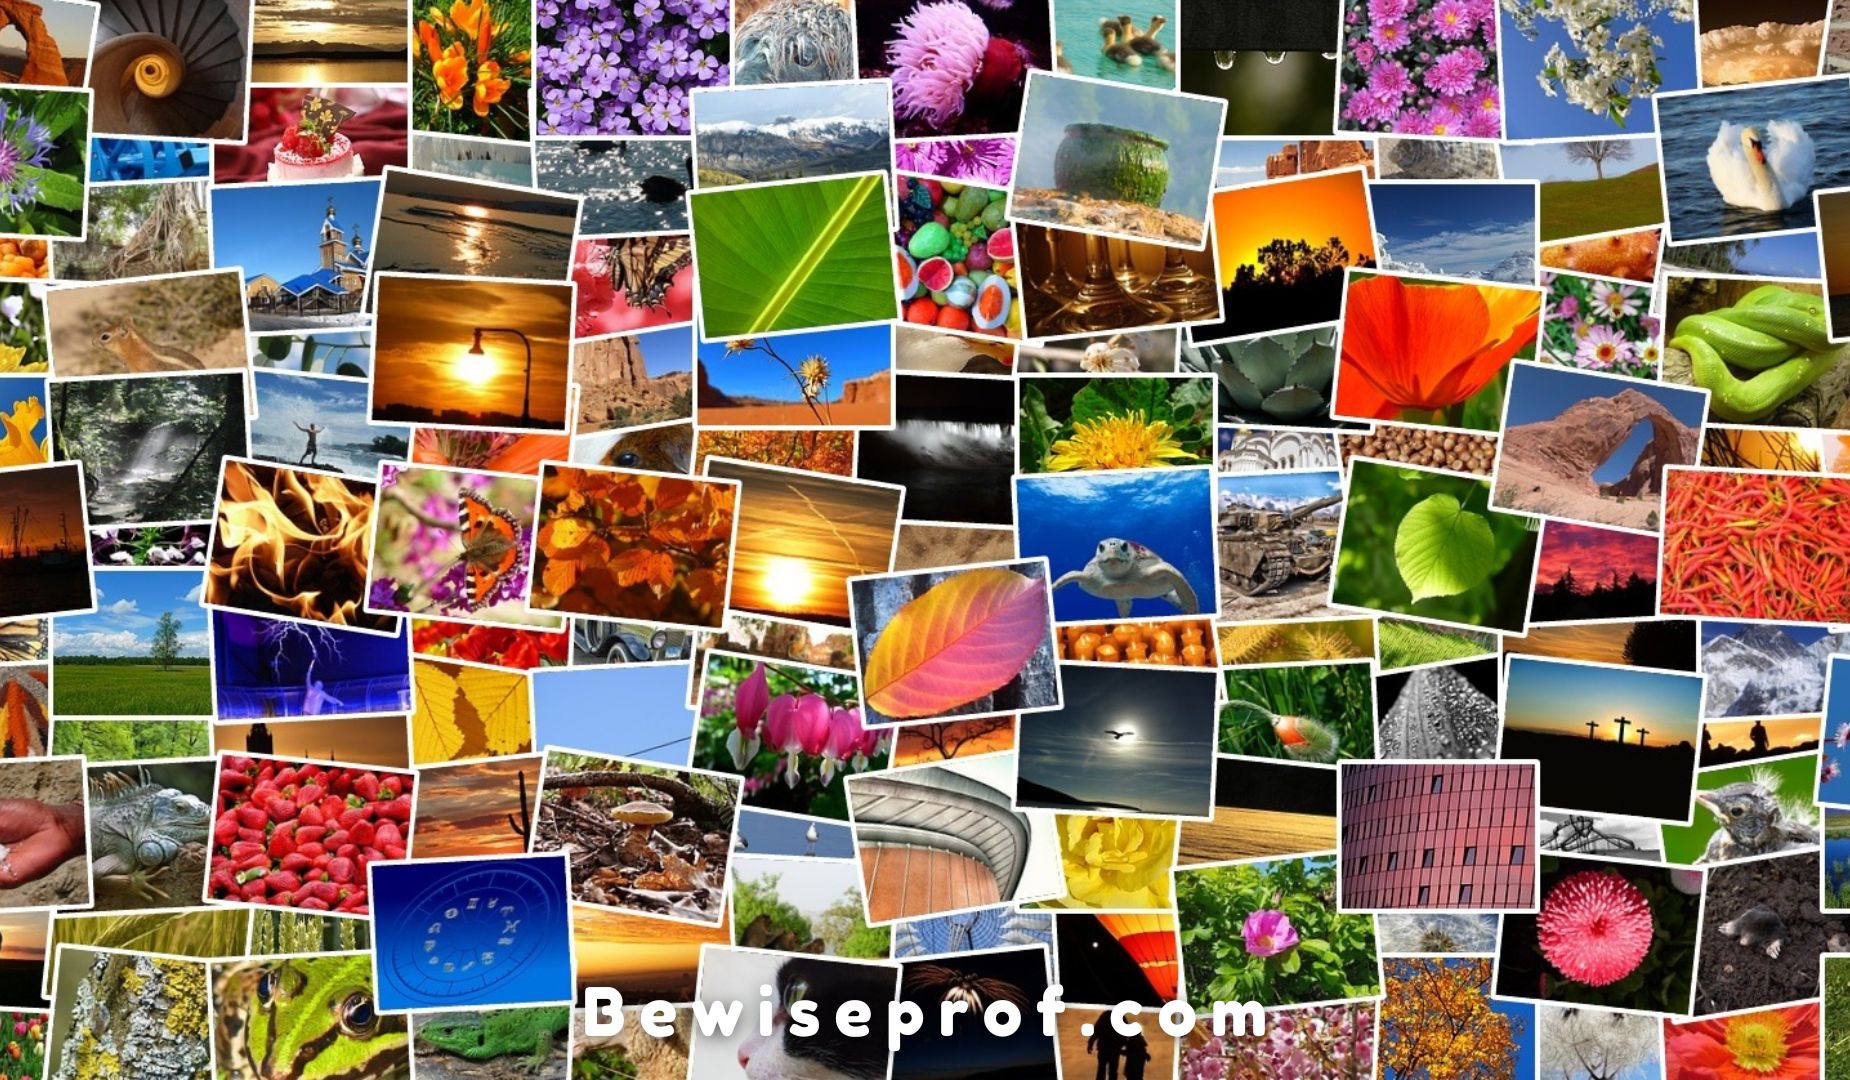 Photo Essay Examples, And Tips For Writing A Good Photo Essay